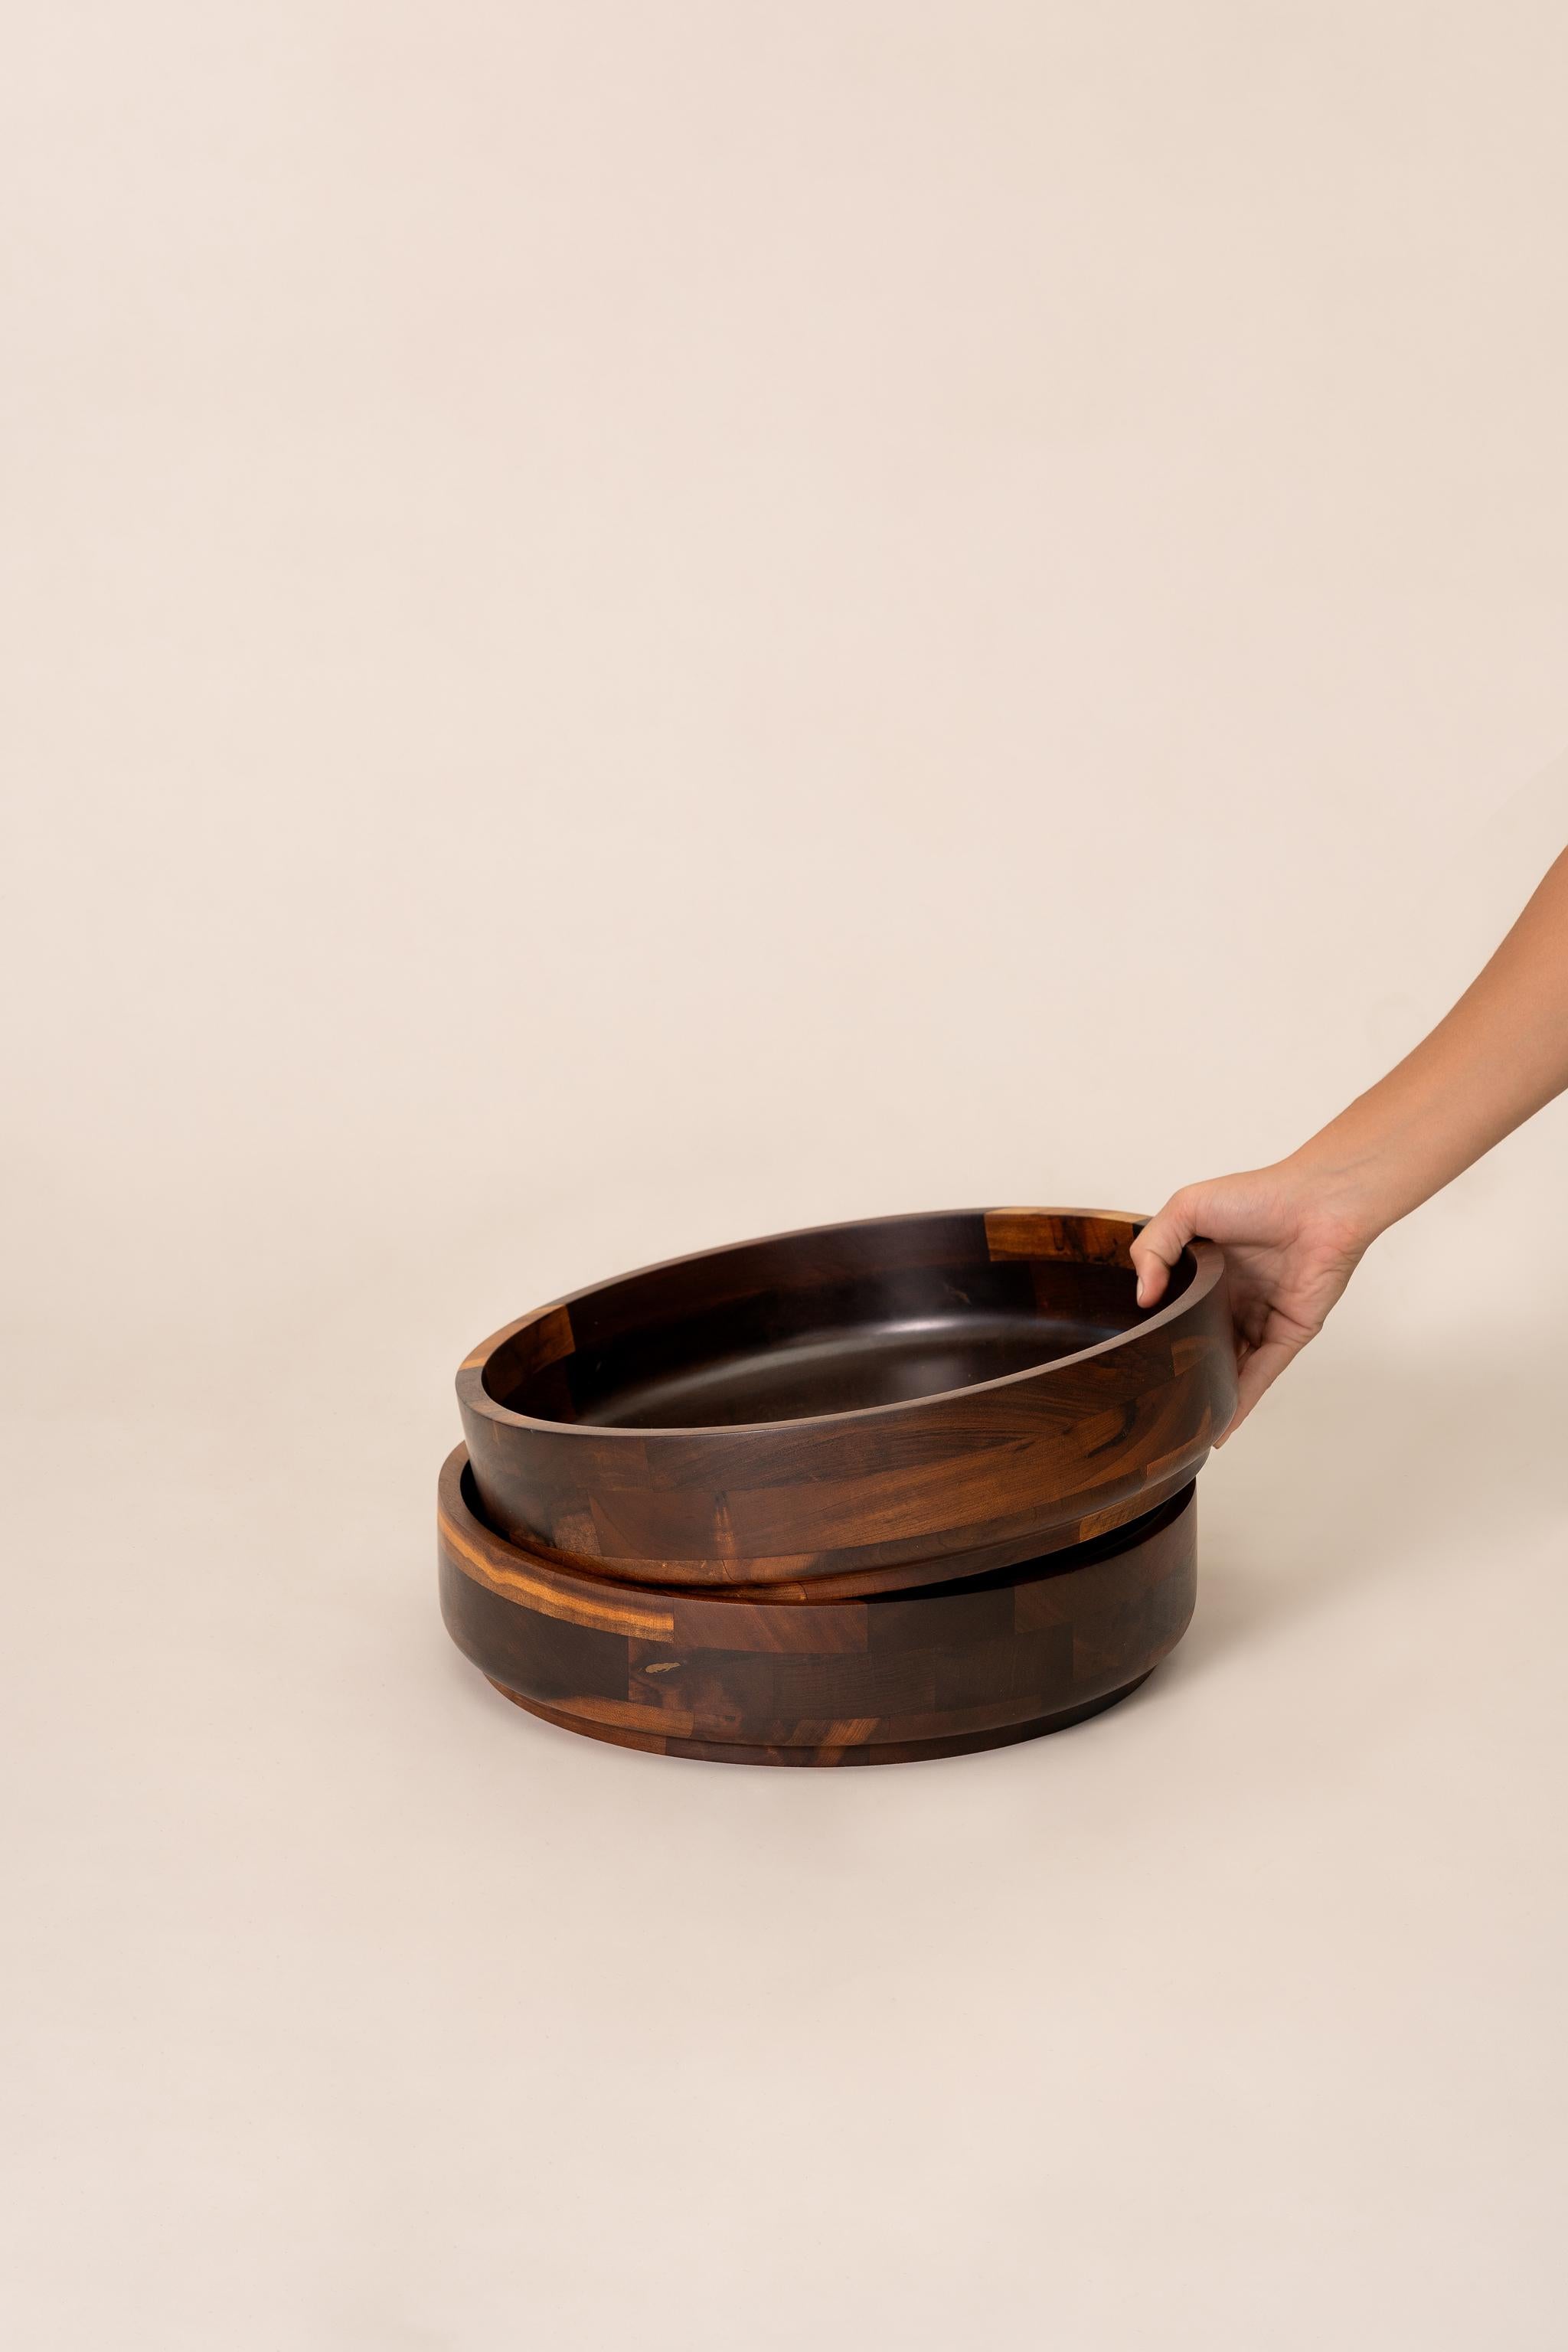 Mid-Century Modern Brazilian Midcentury Centerpiece Bowl in Noble Wood, c. 1970 For Sale